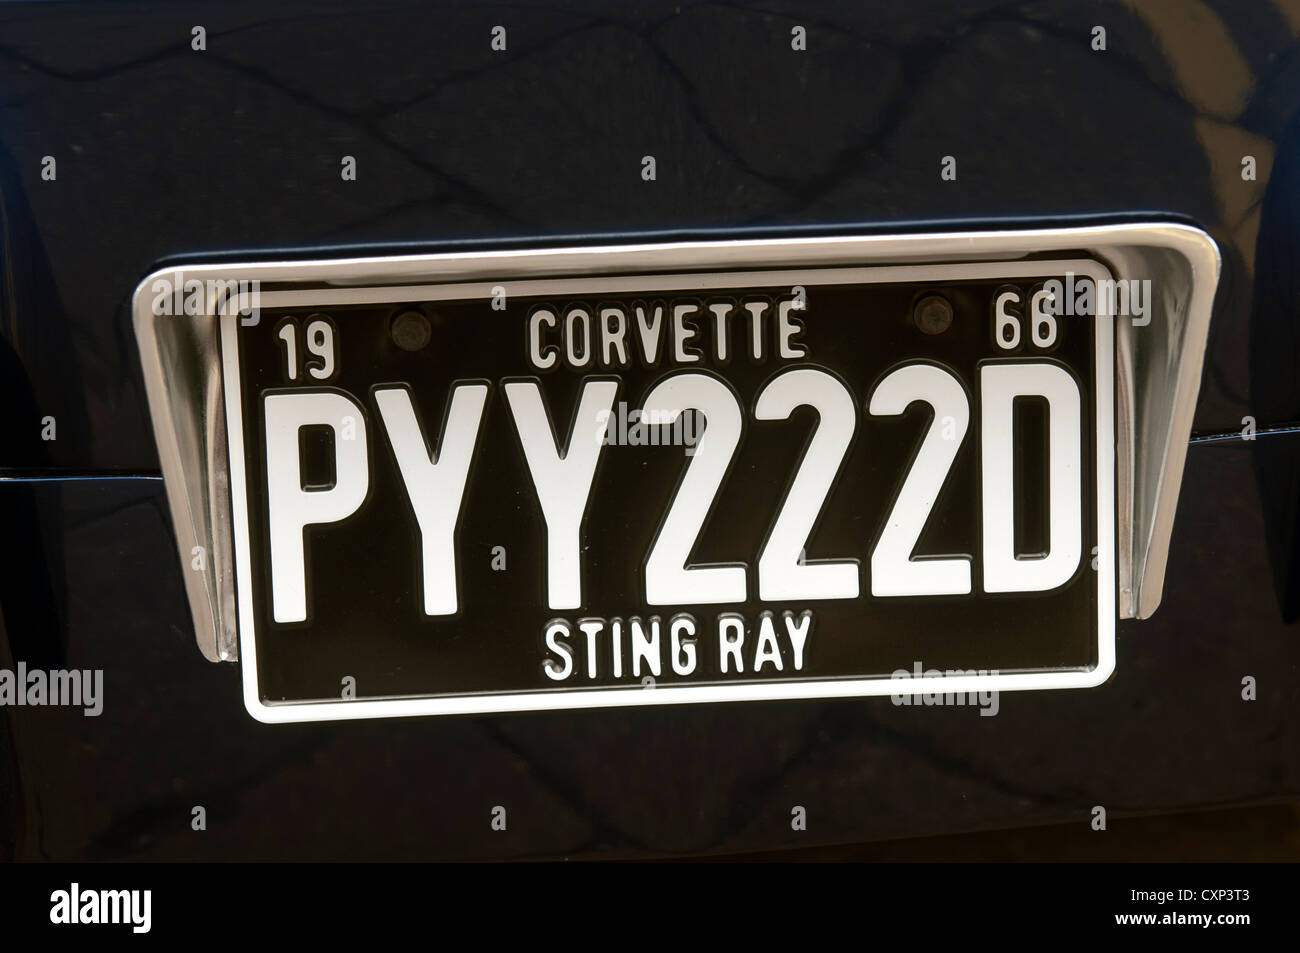 1966 Corvette Sting Ray number plate Stock Photo - Alamy